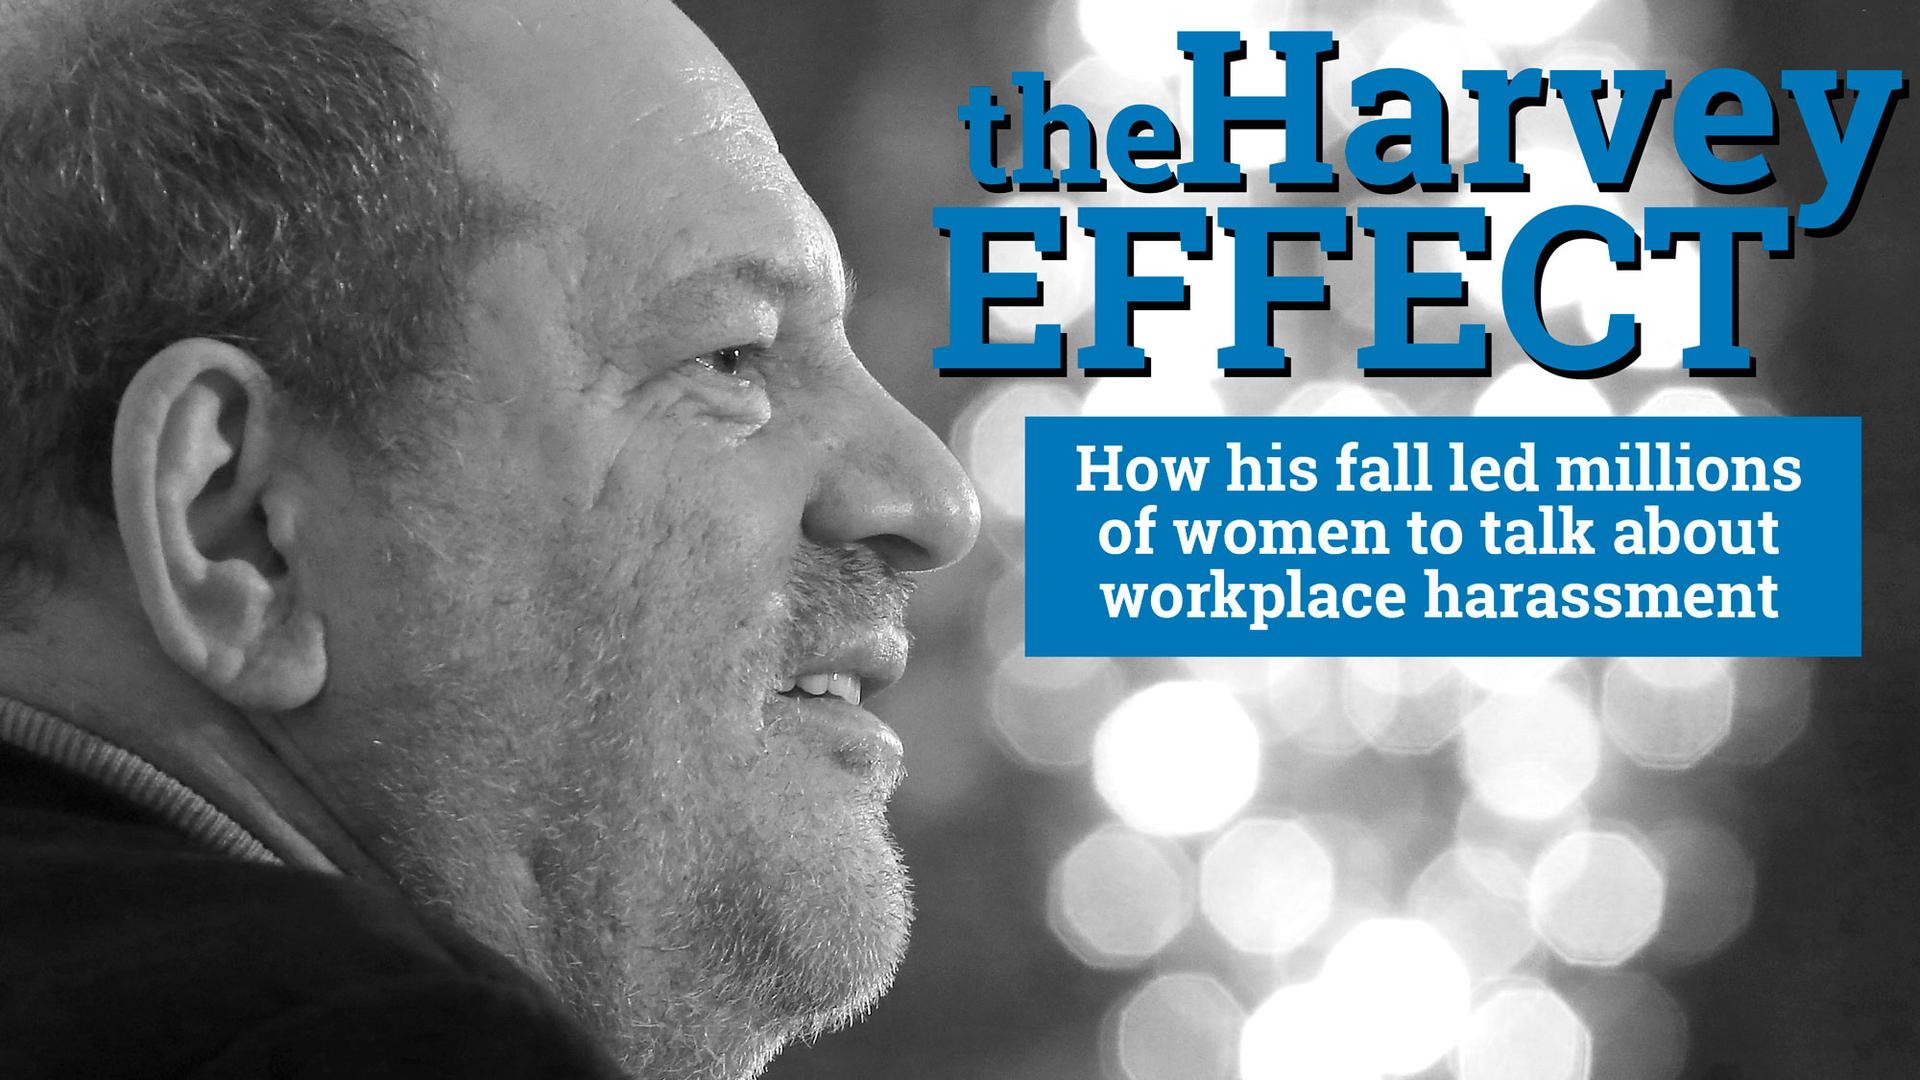 This is a black and white image of a profile of Harvey Weinstein from 2012. In the space next to his face, text says "The Harvey Effect: How his fall led millions of women to talk about workplace harassment."